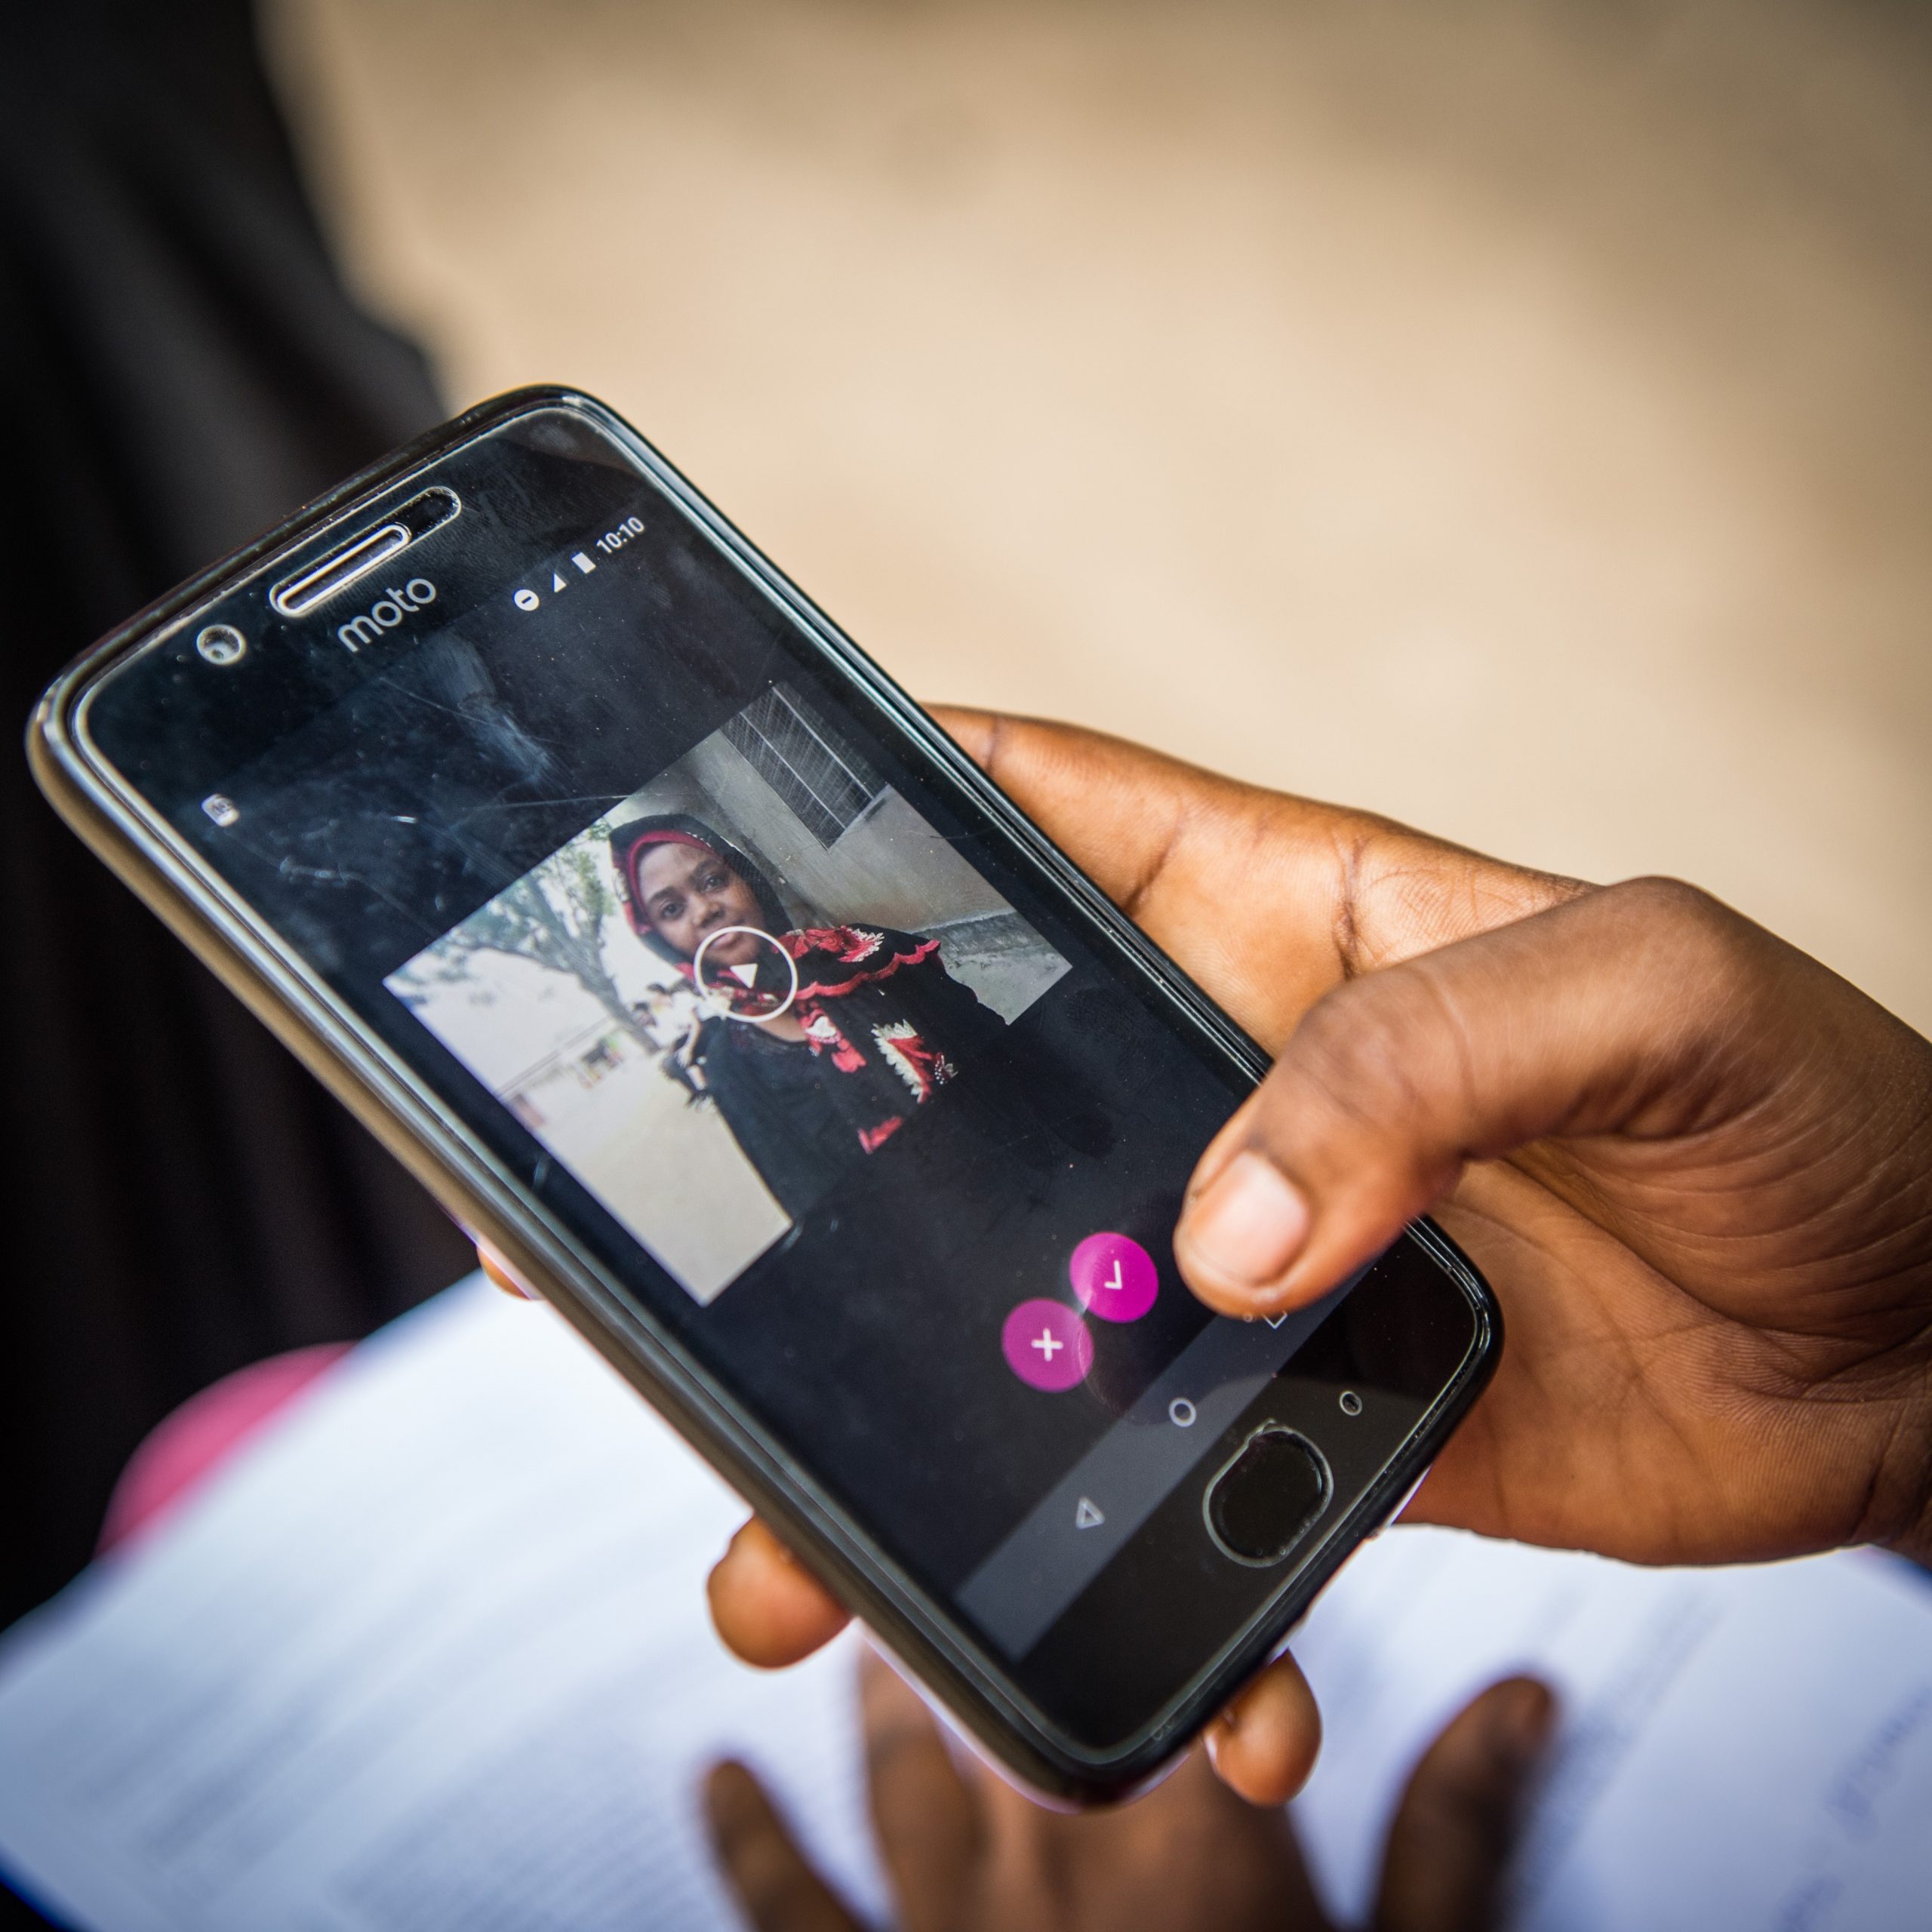 Mobile phone tech to support the mental health of girls